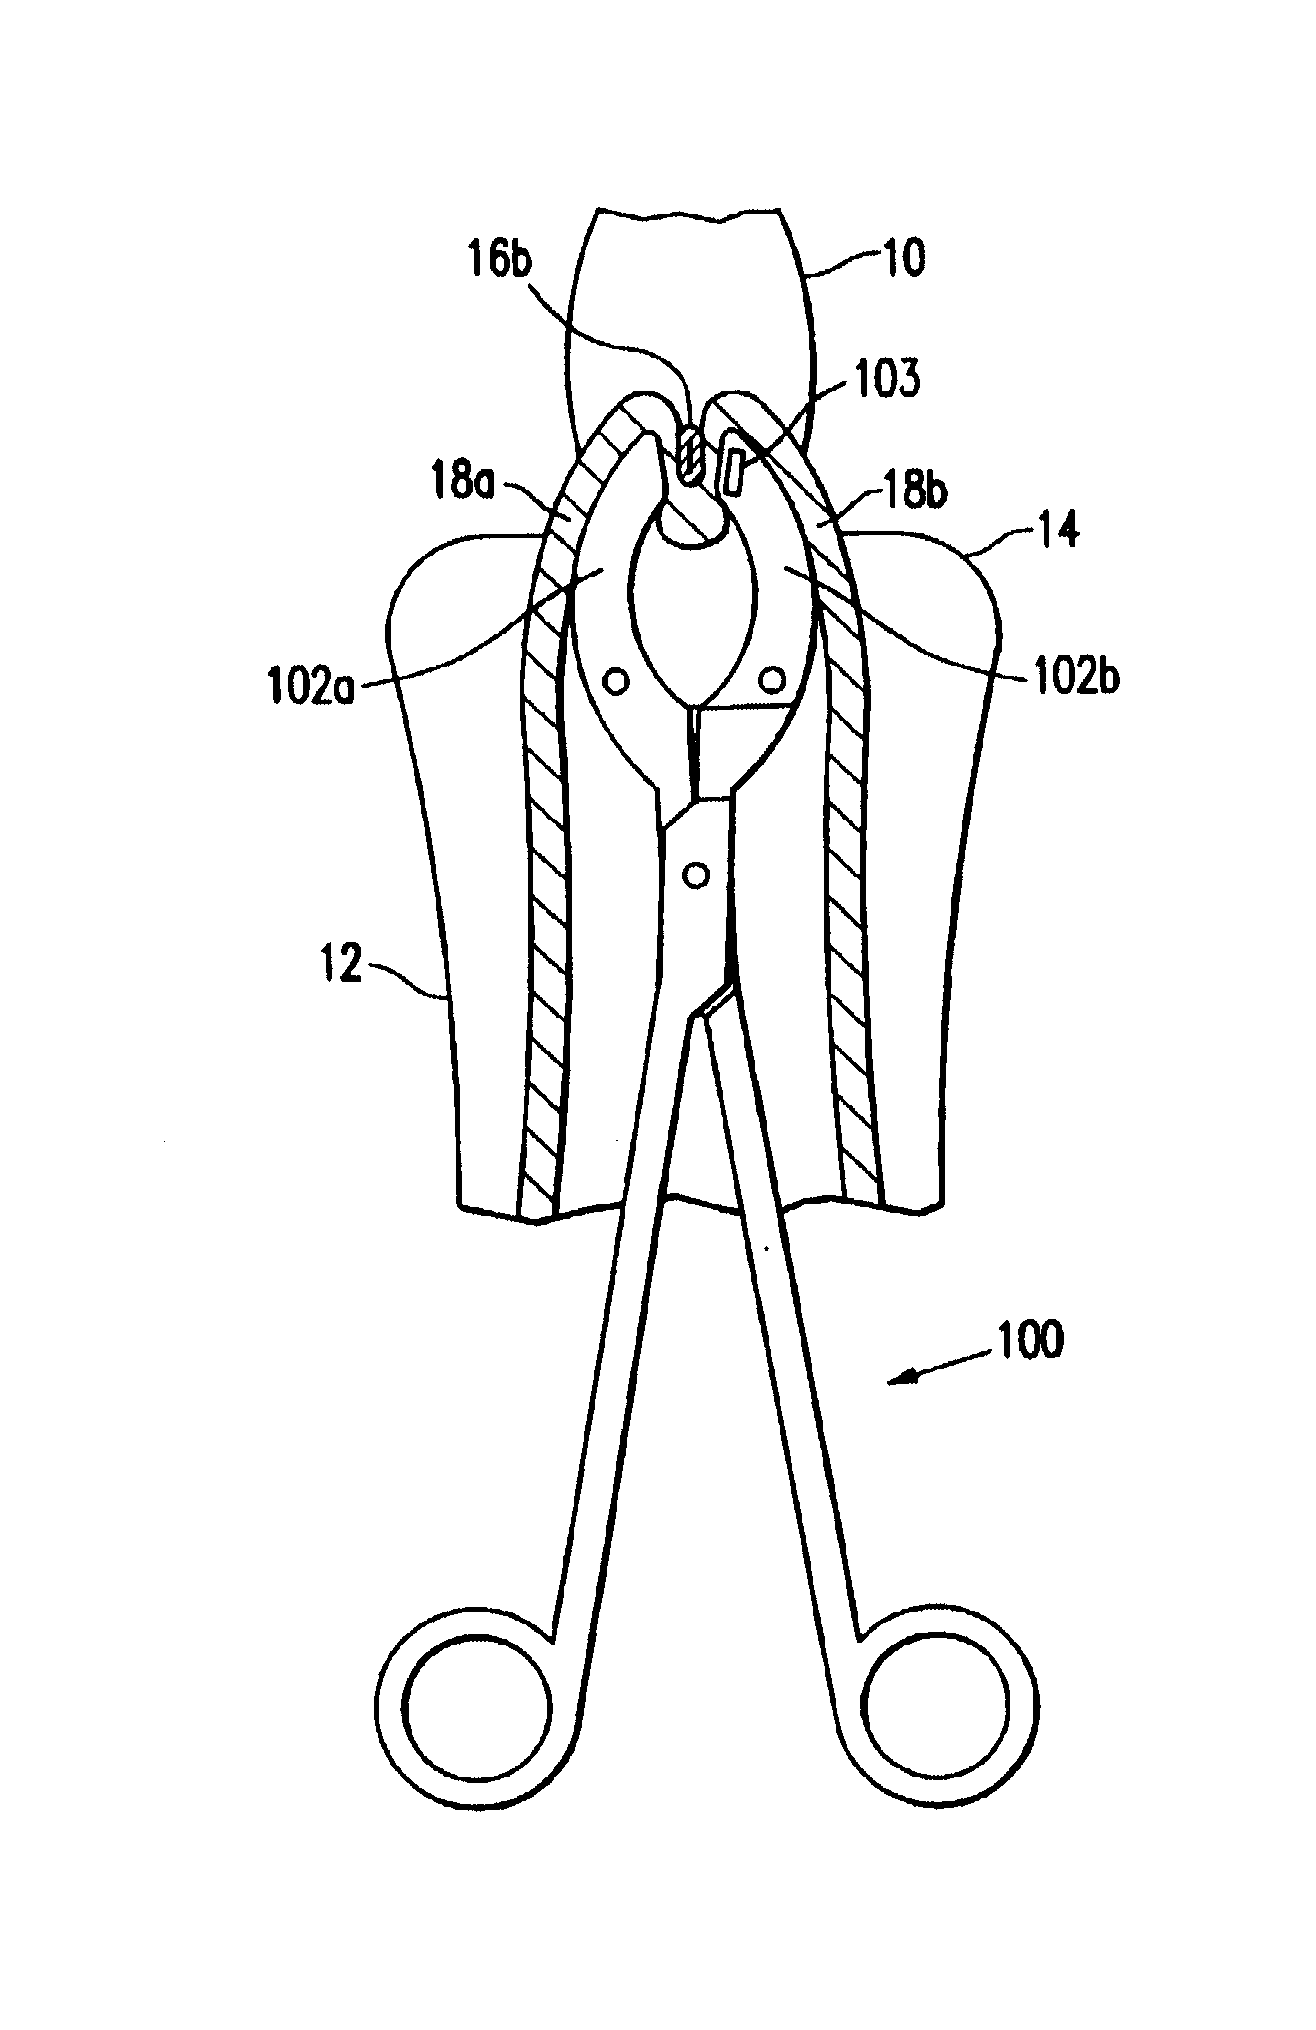 Methods for minimally-invasive, non-permanent occlusion of a uterine artery